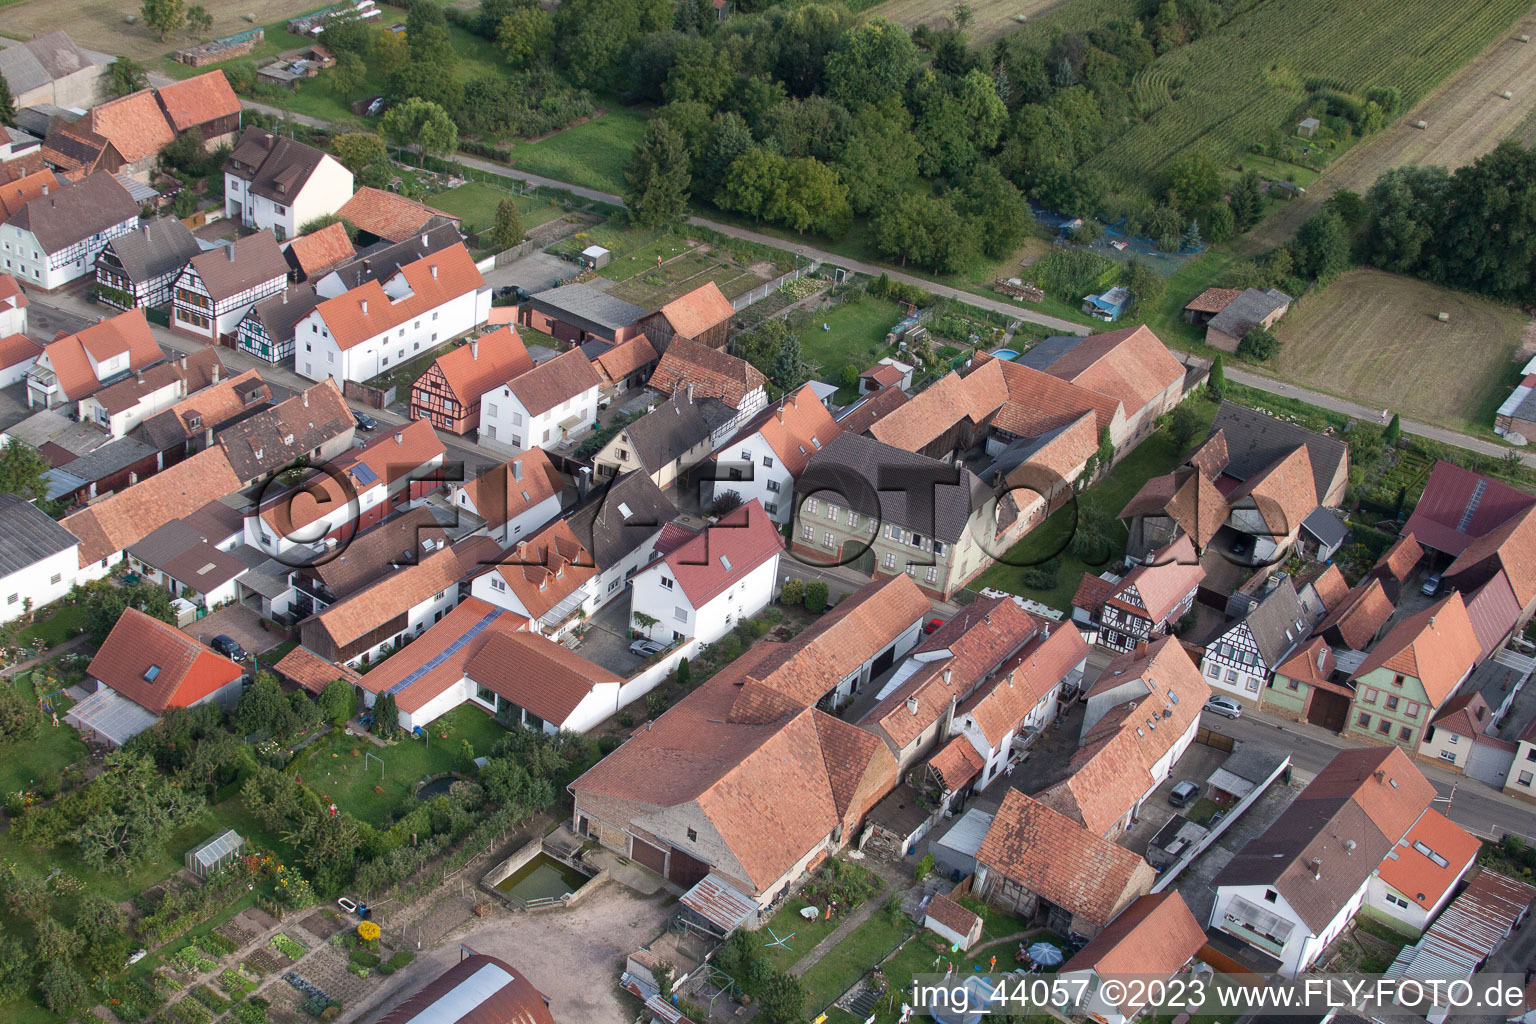 Saarstr in Kandel in the state Rhineland-Palatinate, Germany from a drone